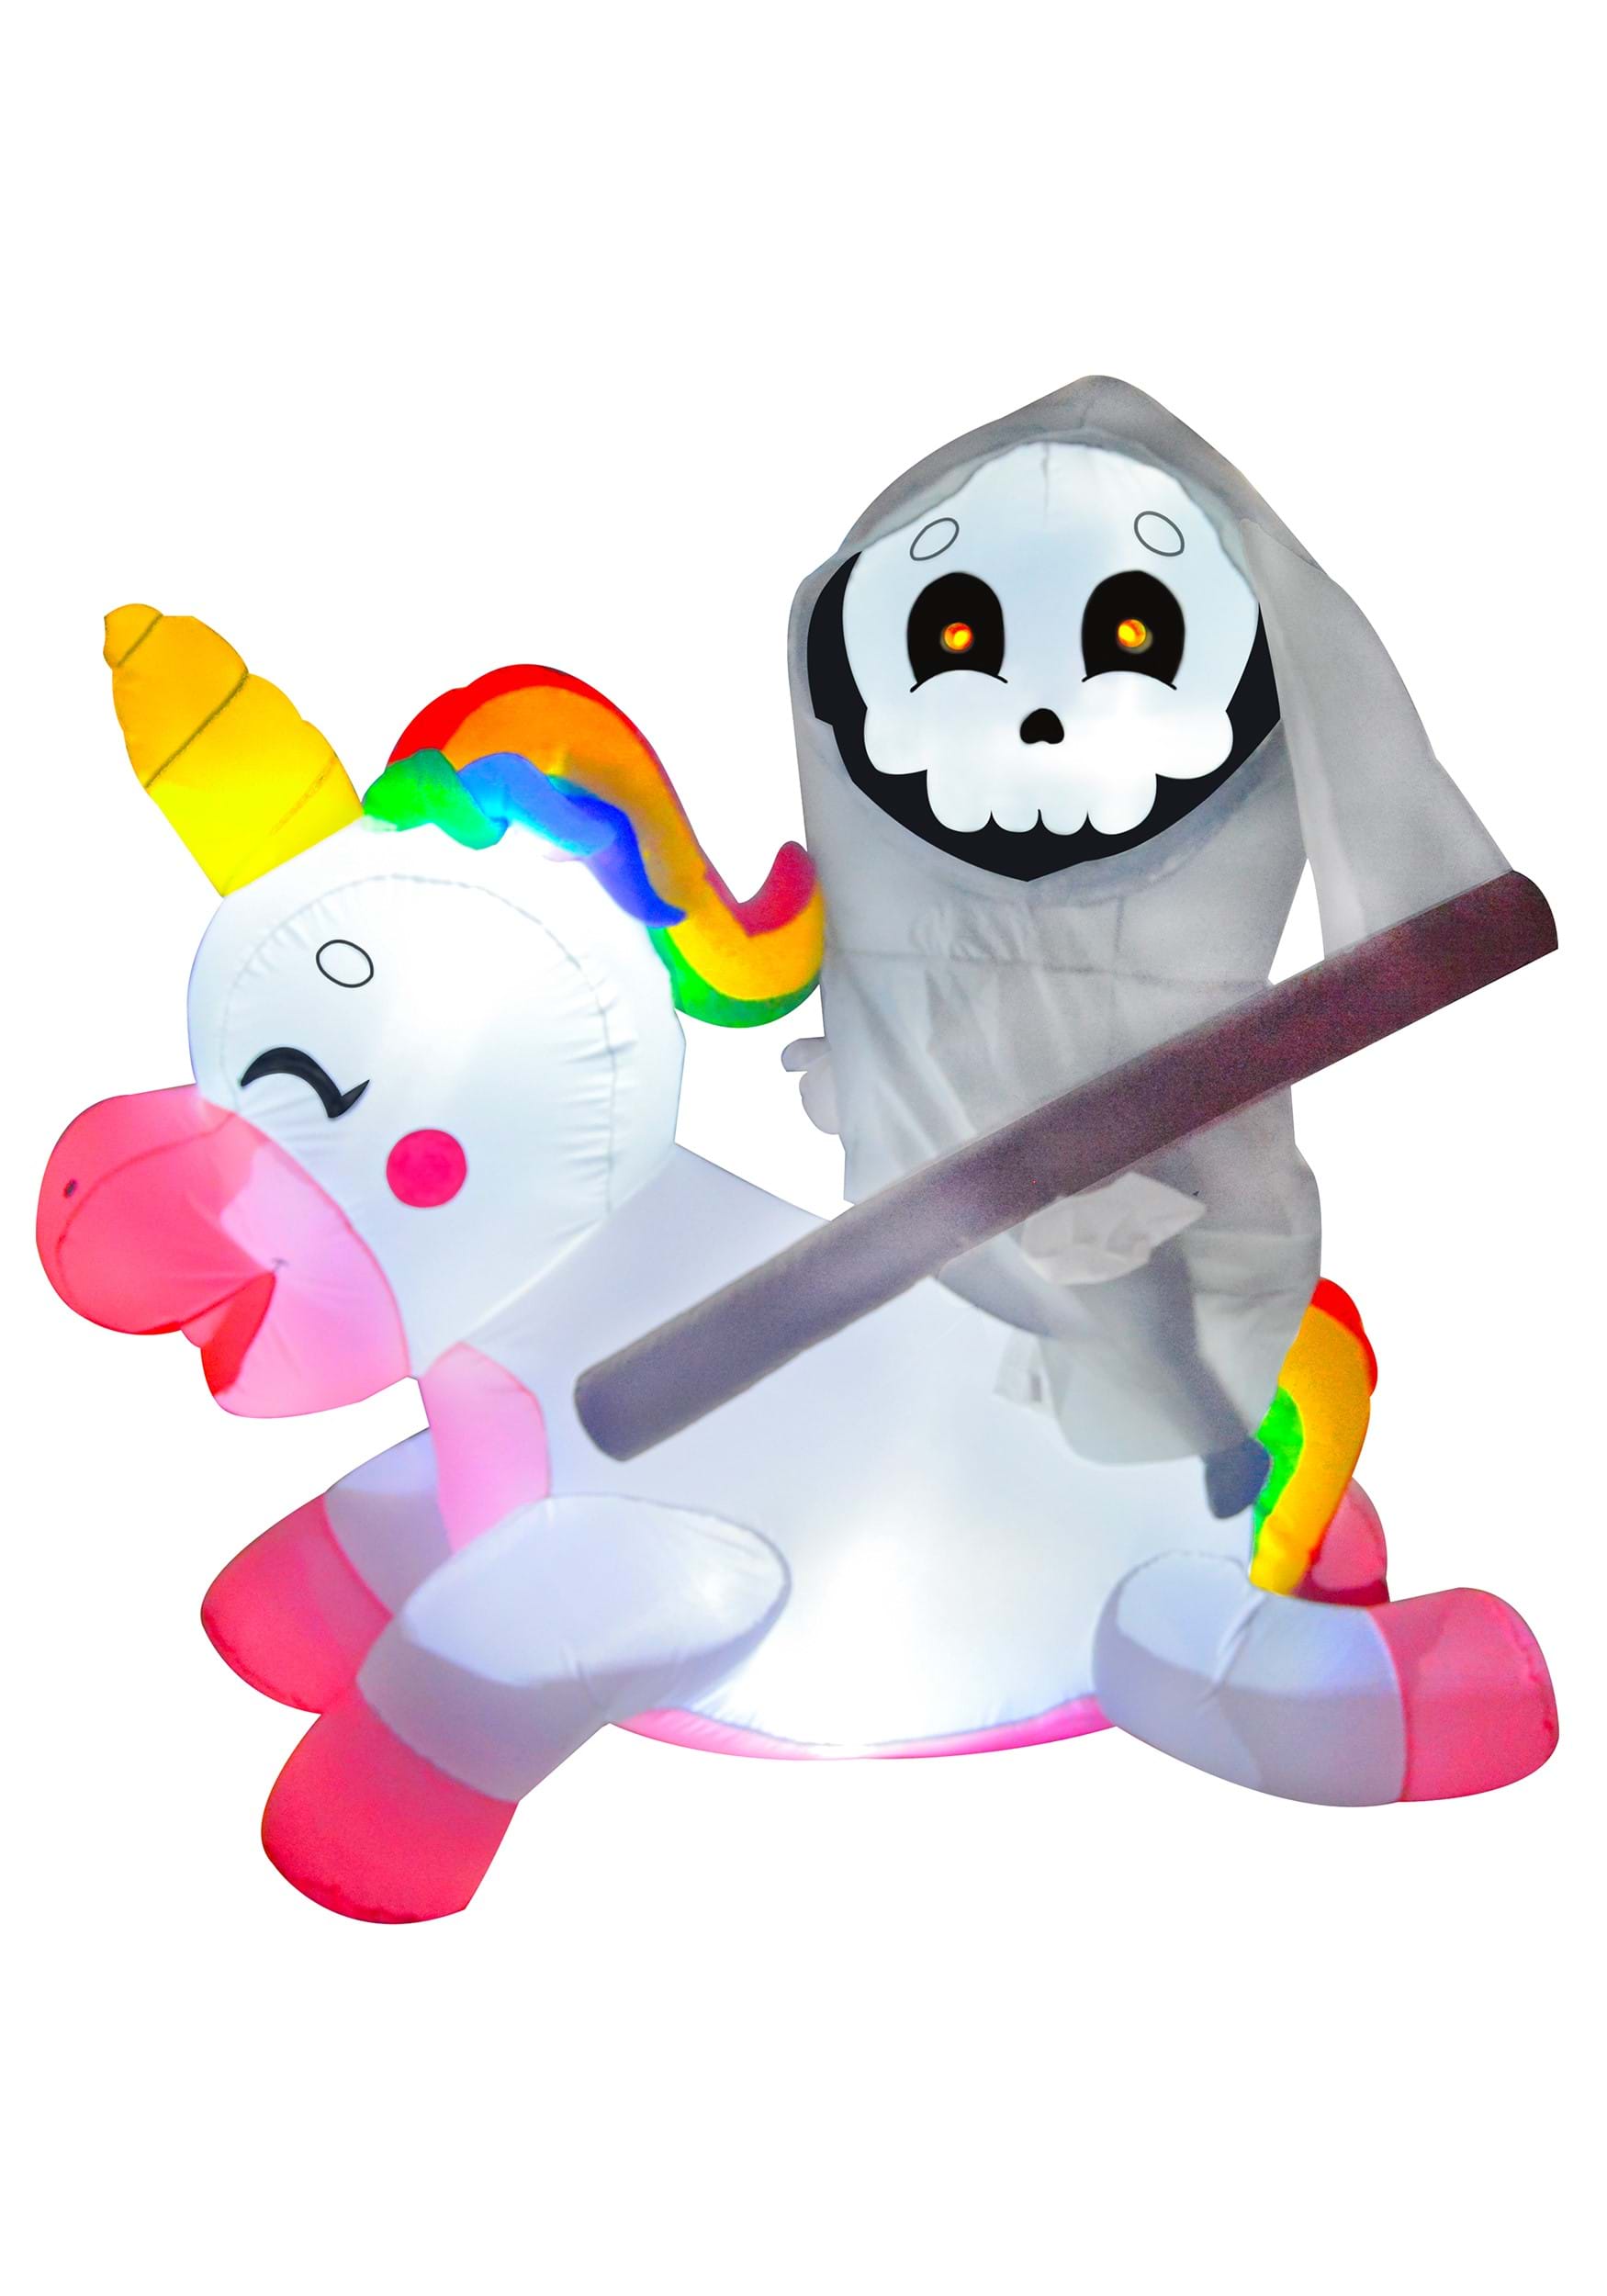 5FT Tall Reaper Riding Unicorn Inflatable Decoration